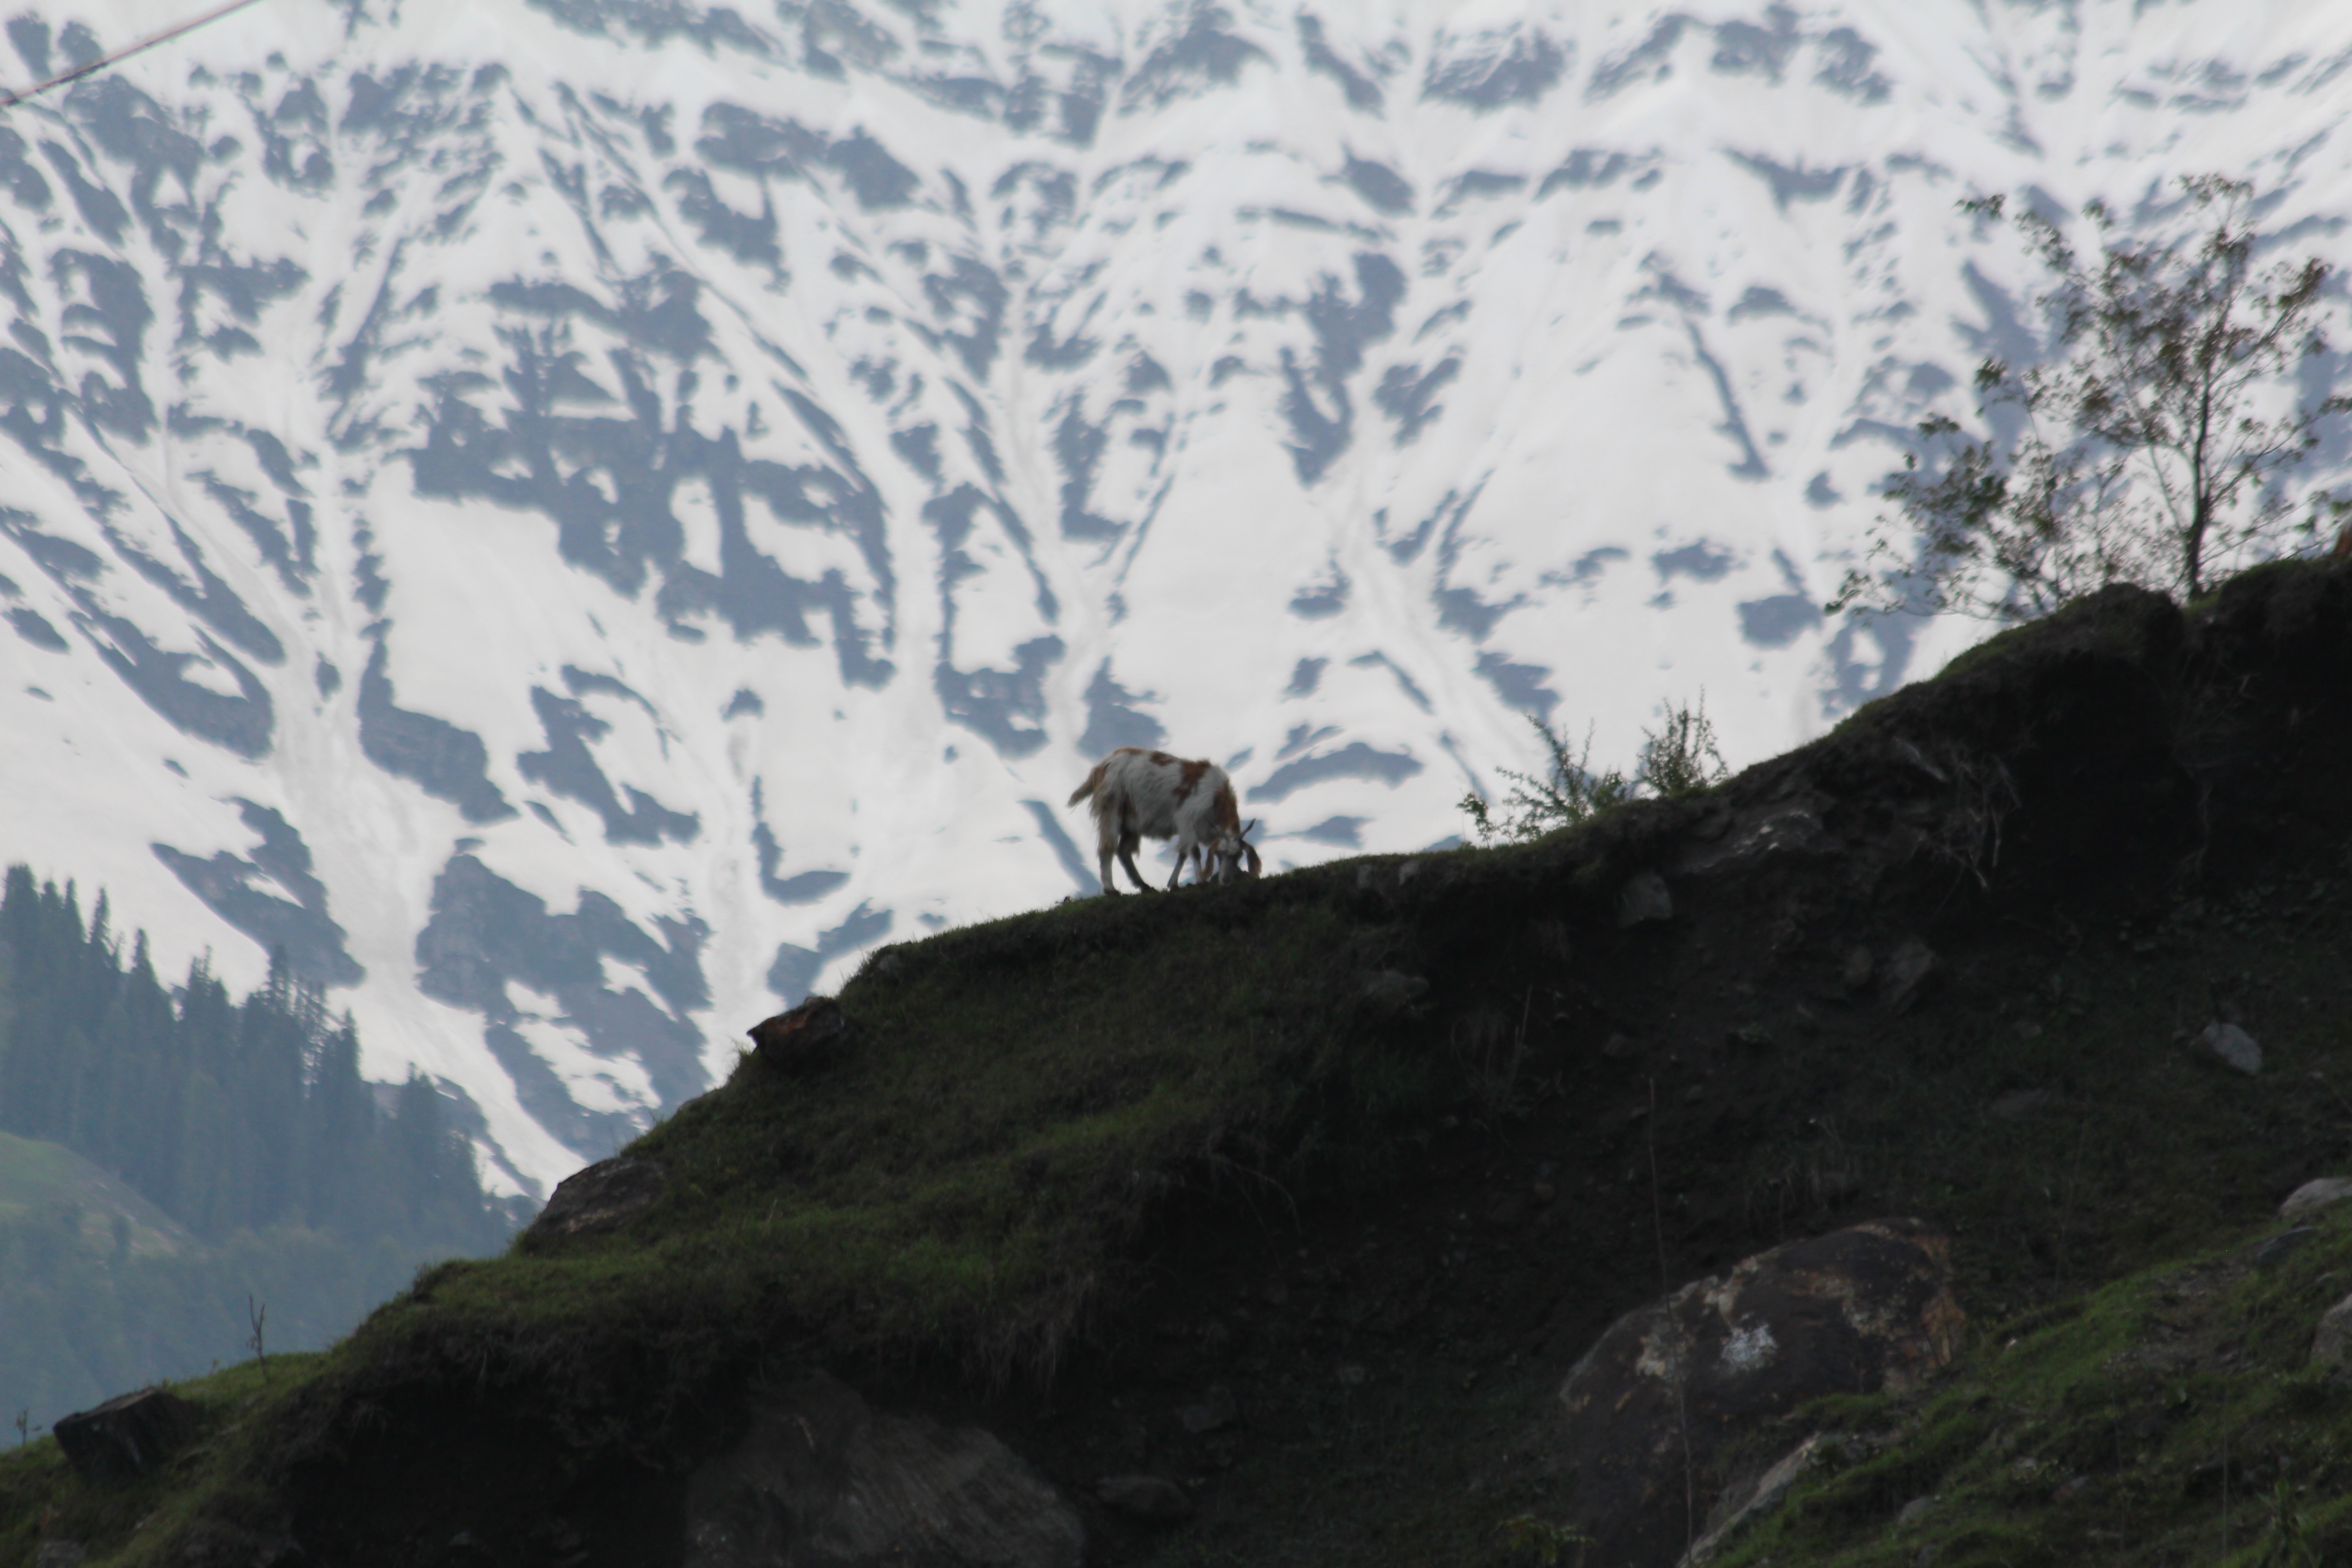 File:Lonely Goat.JPG - Wikimedia Commons